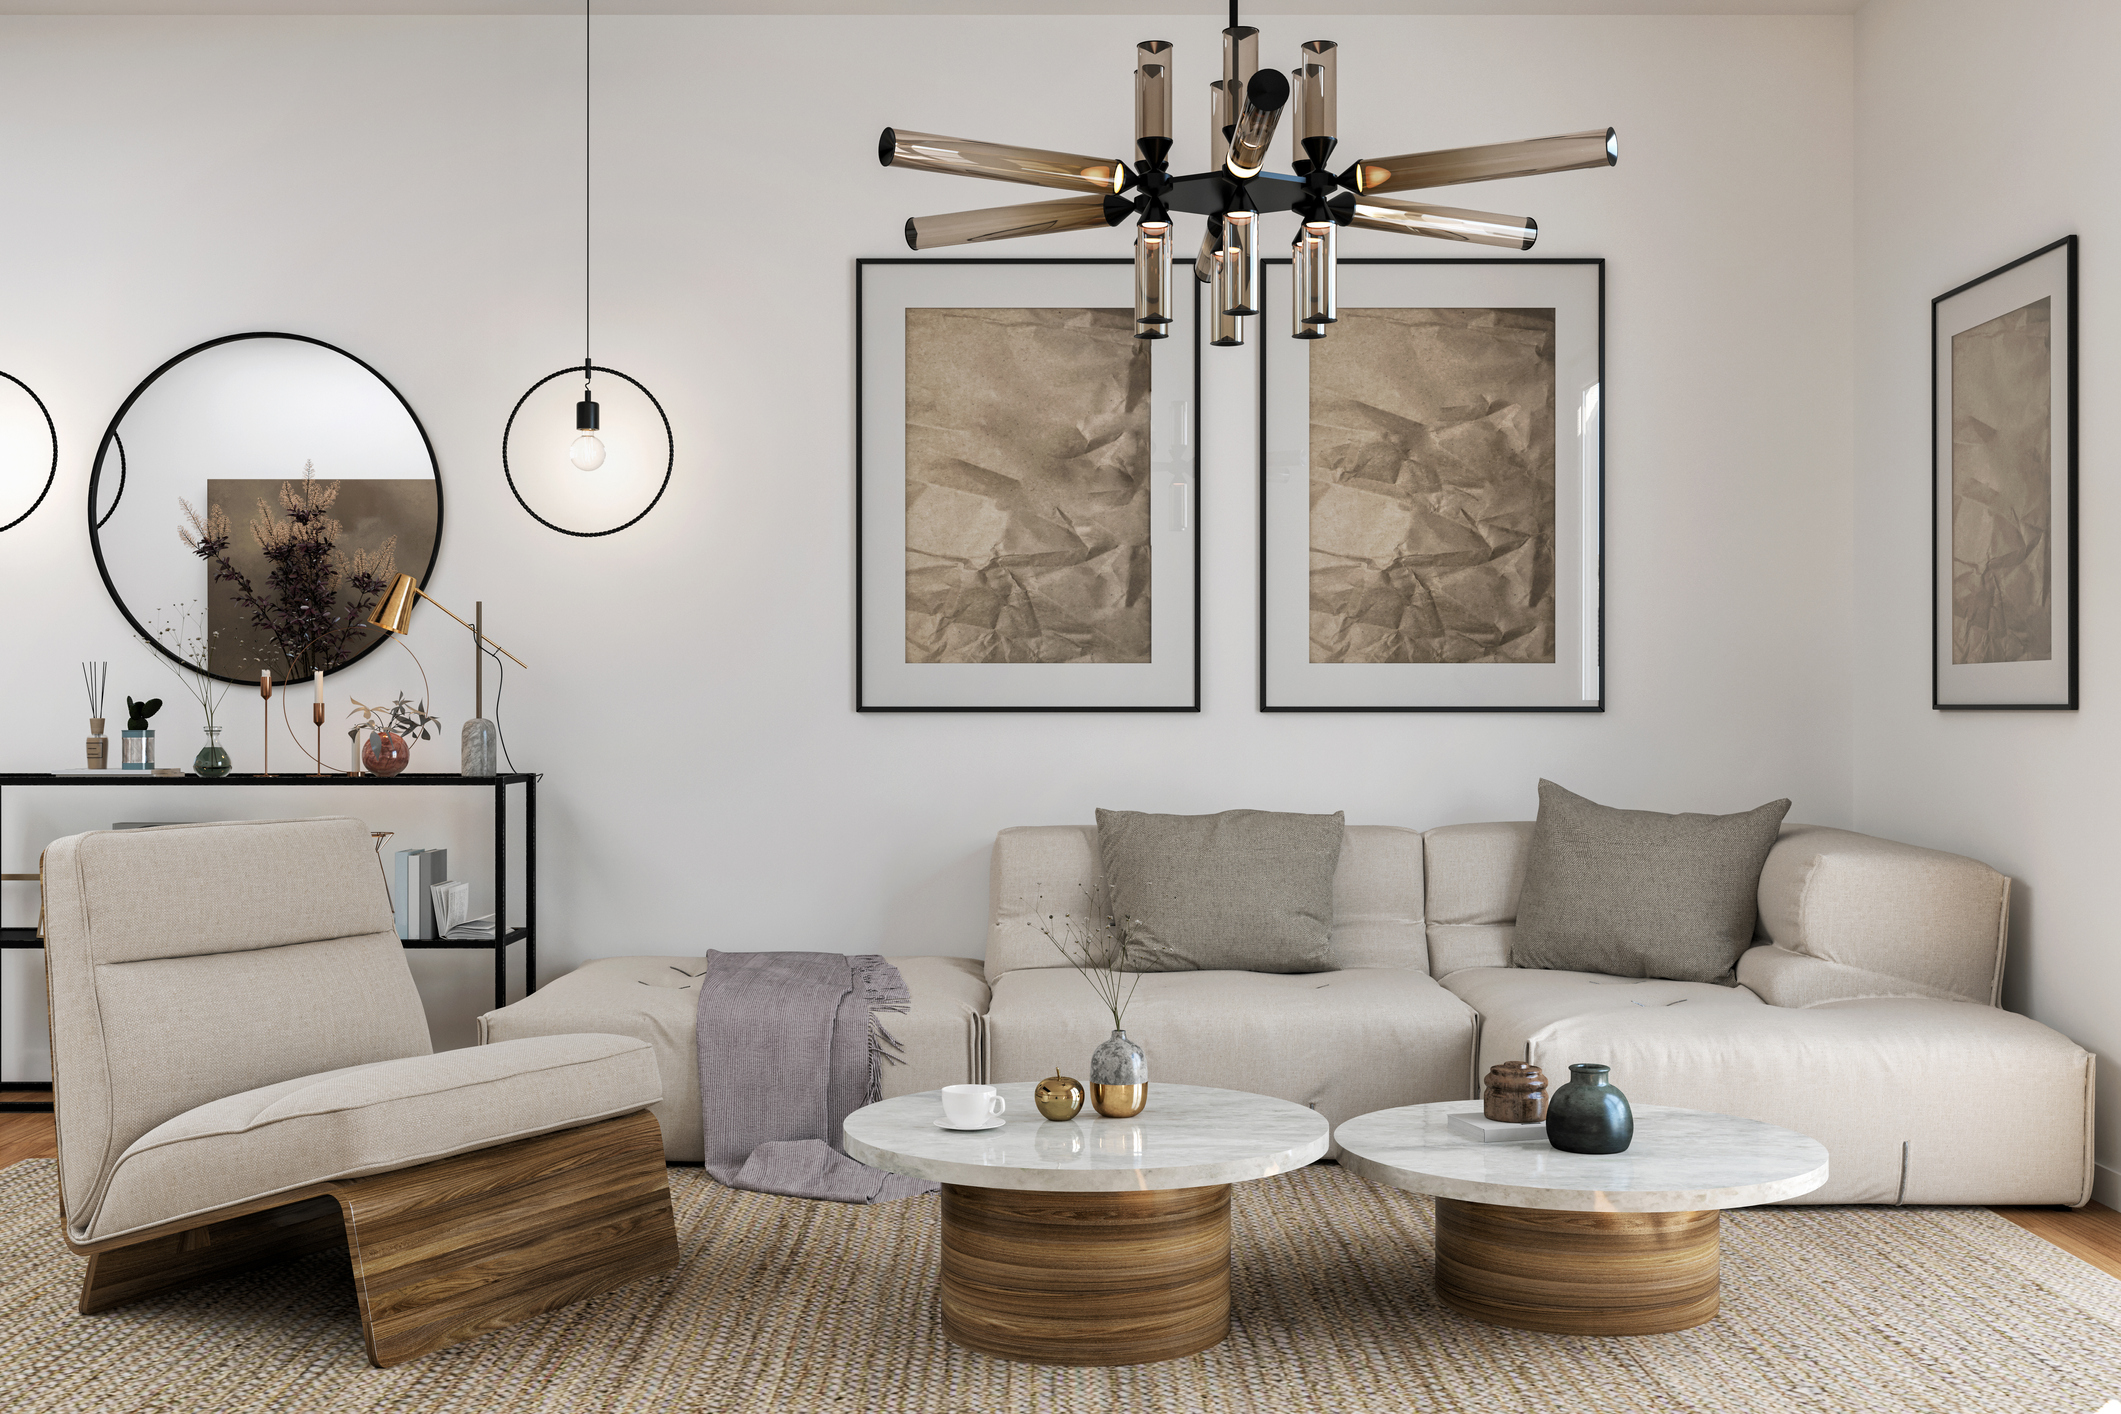 A living room area characterized by a neutral-colored contemporary interior design style. White walls host large neutral art in black frames. An off-white sectional couch with pewter heathered pillows and a grey blanket sit in the corner, with 2 wood and white marble round coffee tables. On the left is an angular seat with matching wood frame and cream-colored cushions. Above is a metal and dark glass light fixture. Open concept is implied with a black metal table in the back on the left against the wall, with metal lamps, glass reed infuser, and metal candle holders.